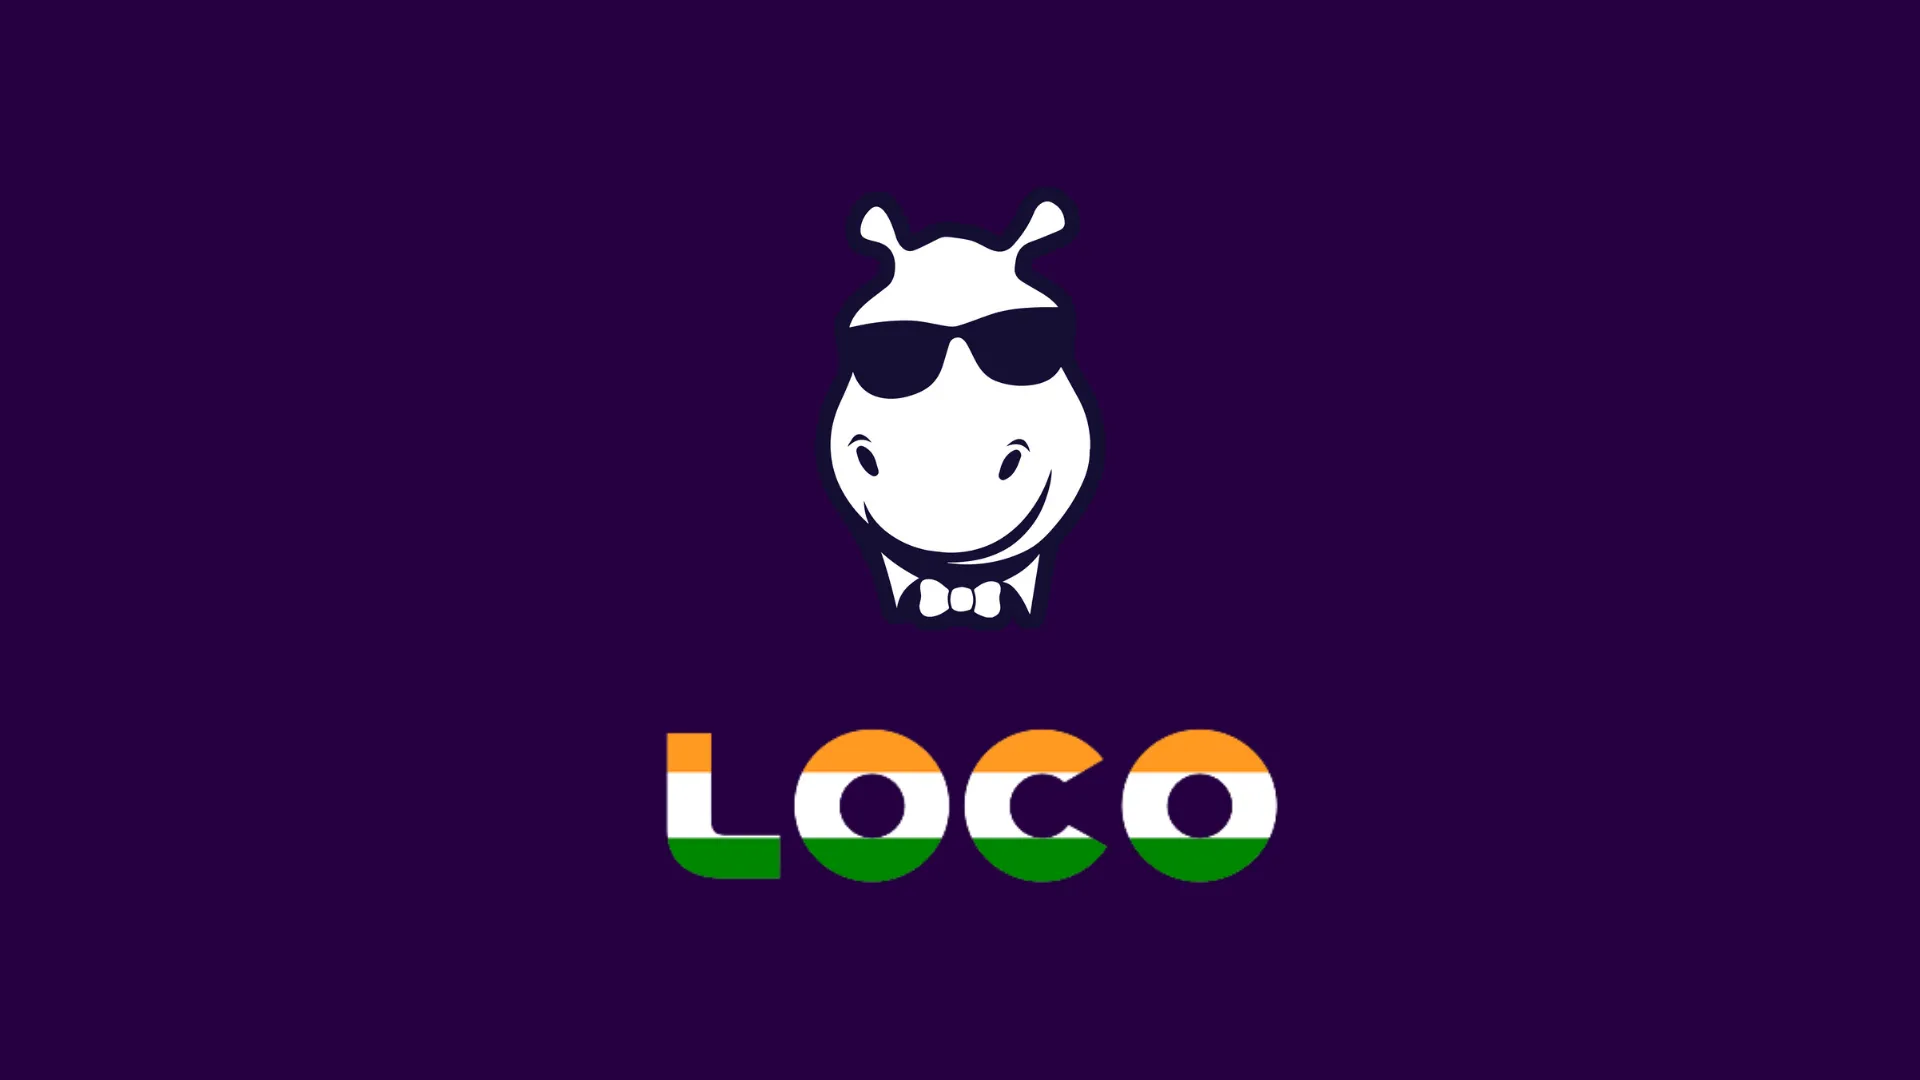 Loco and Indian Streaming Industry - One Billion Rea$on$ for Optimism